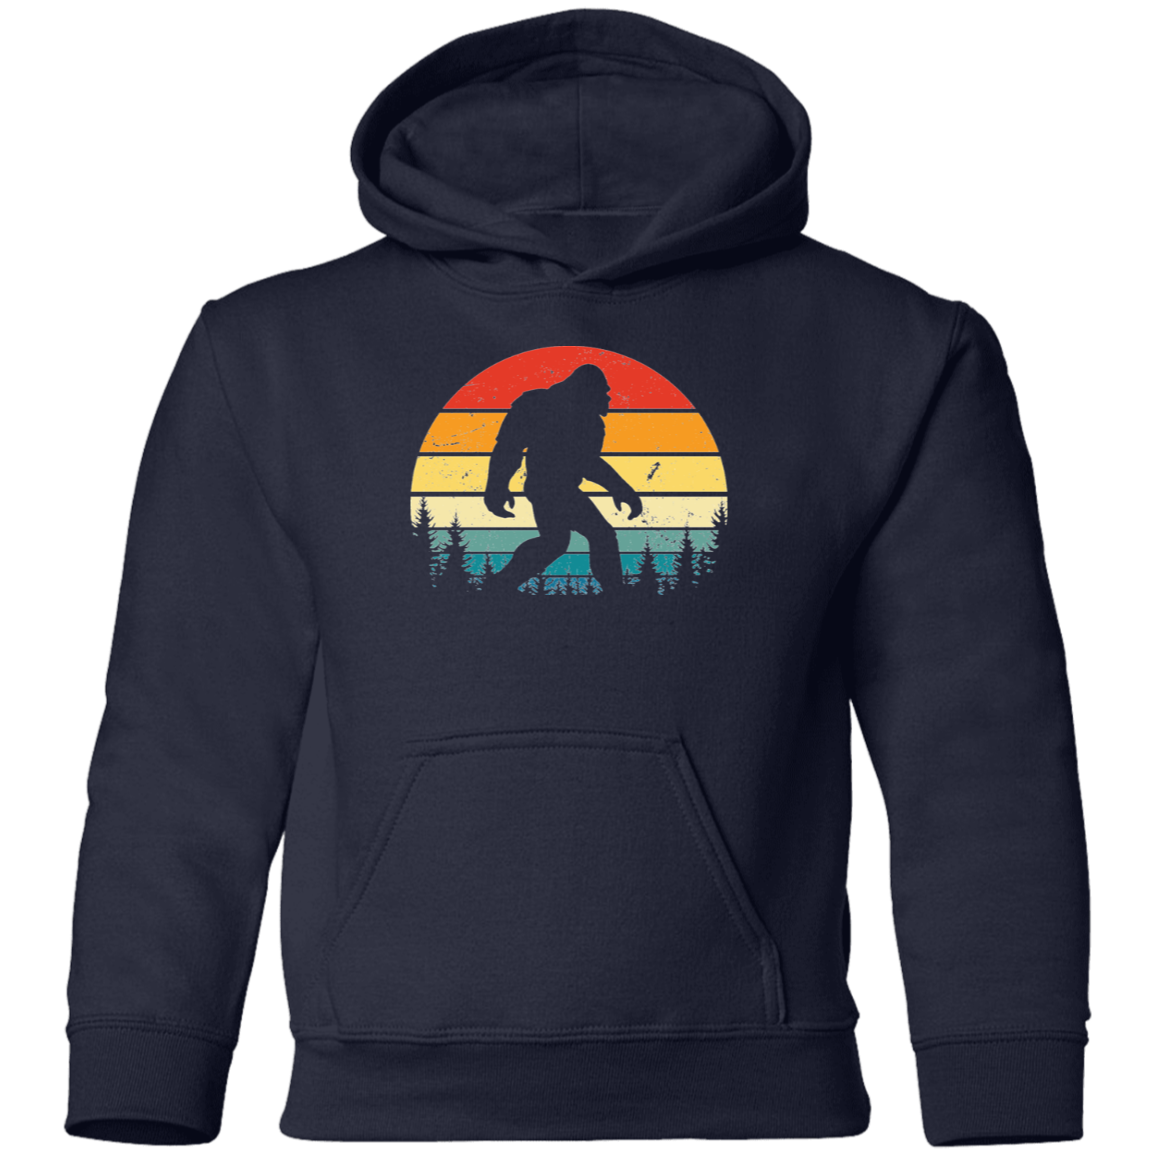 navy Distressed style Retro Sunset Bigfoot Hoodie for kids